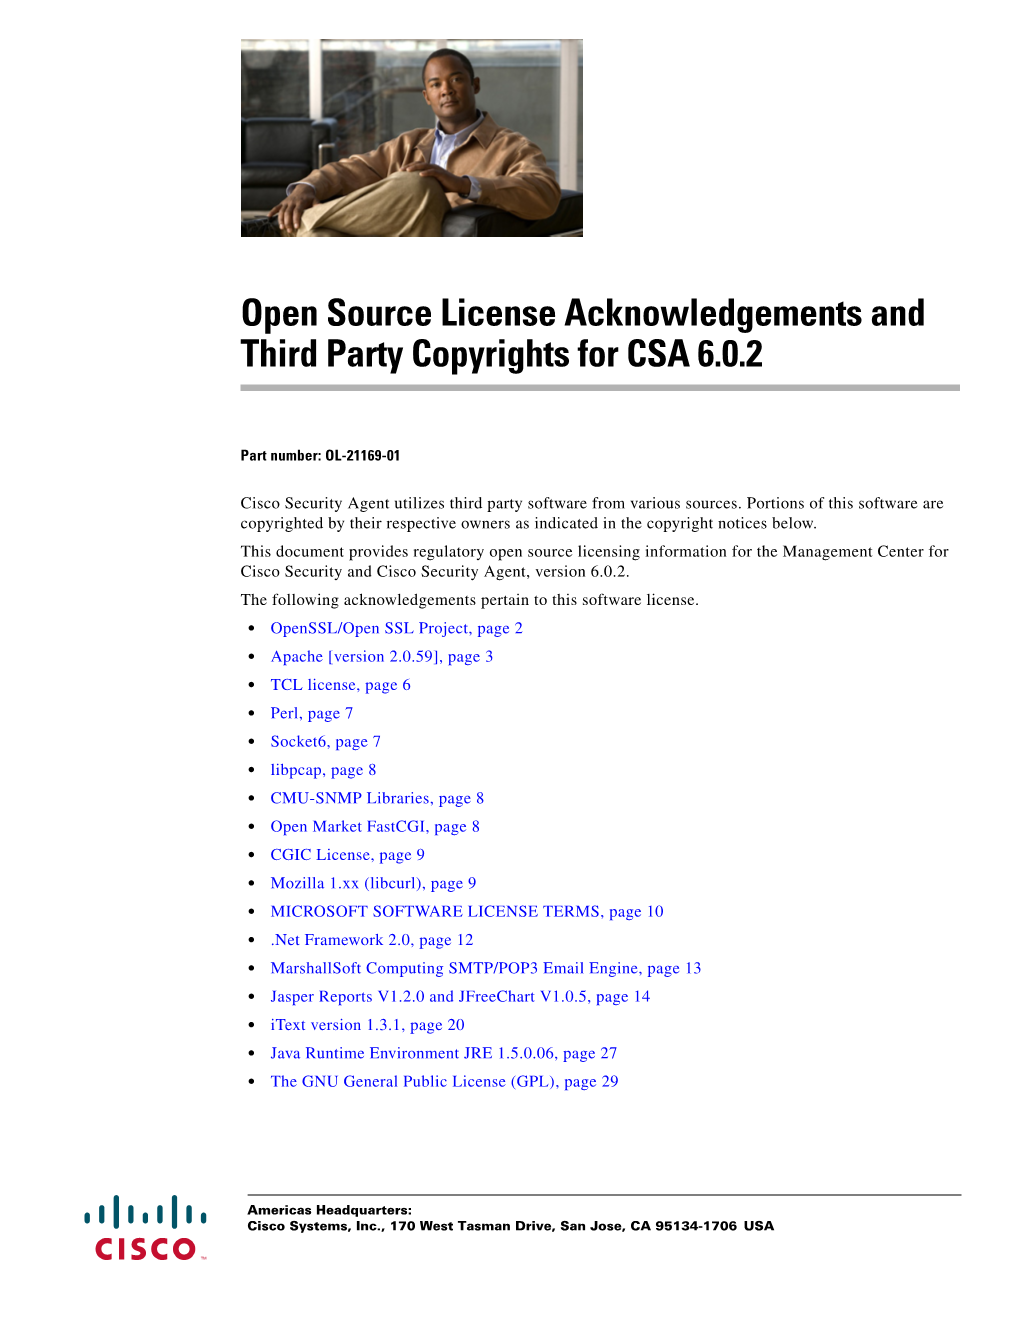 Open Source License Acknowledgements and Third Party Copyrights for CSA 6.0.2